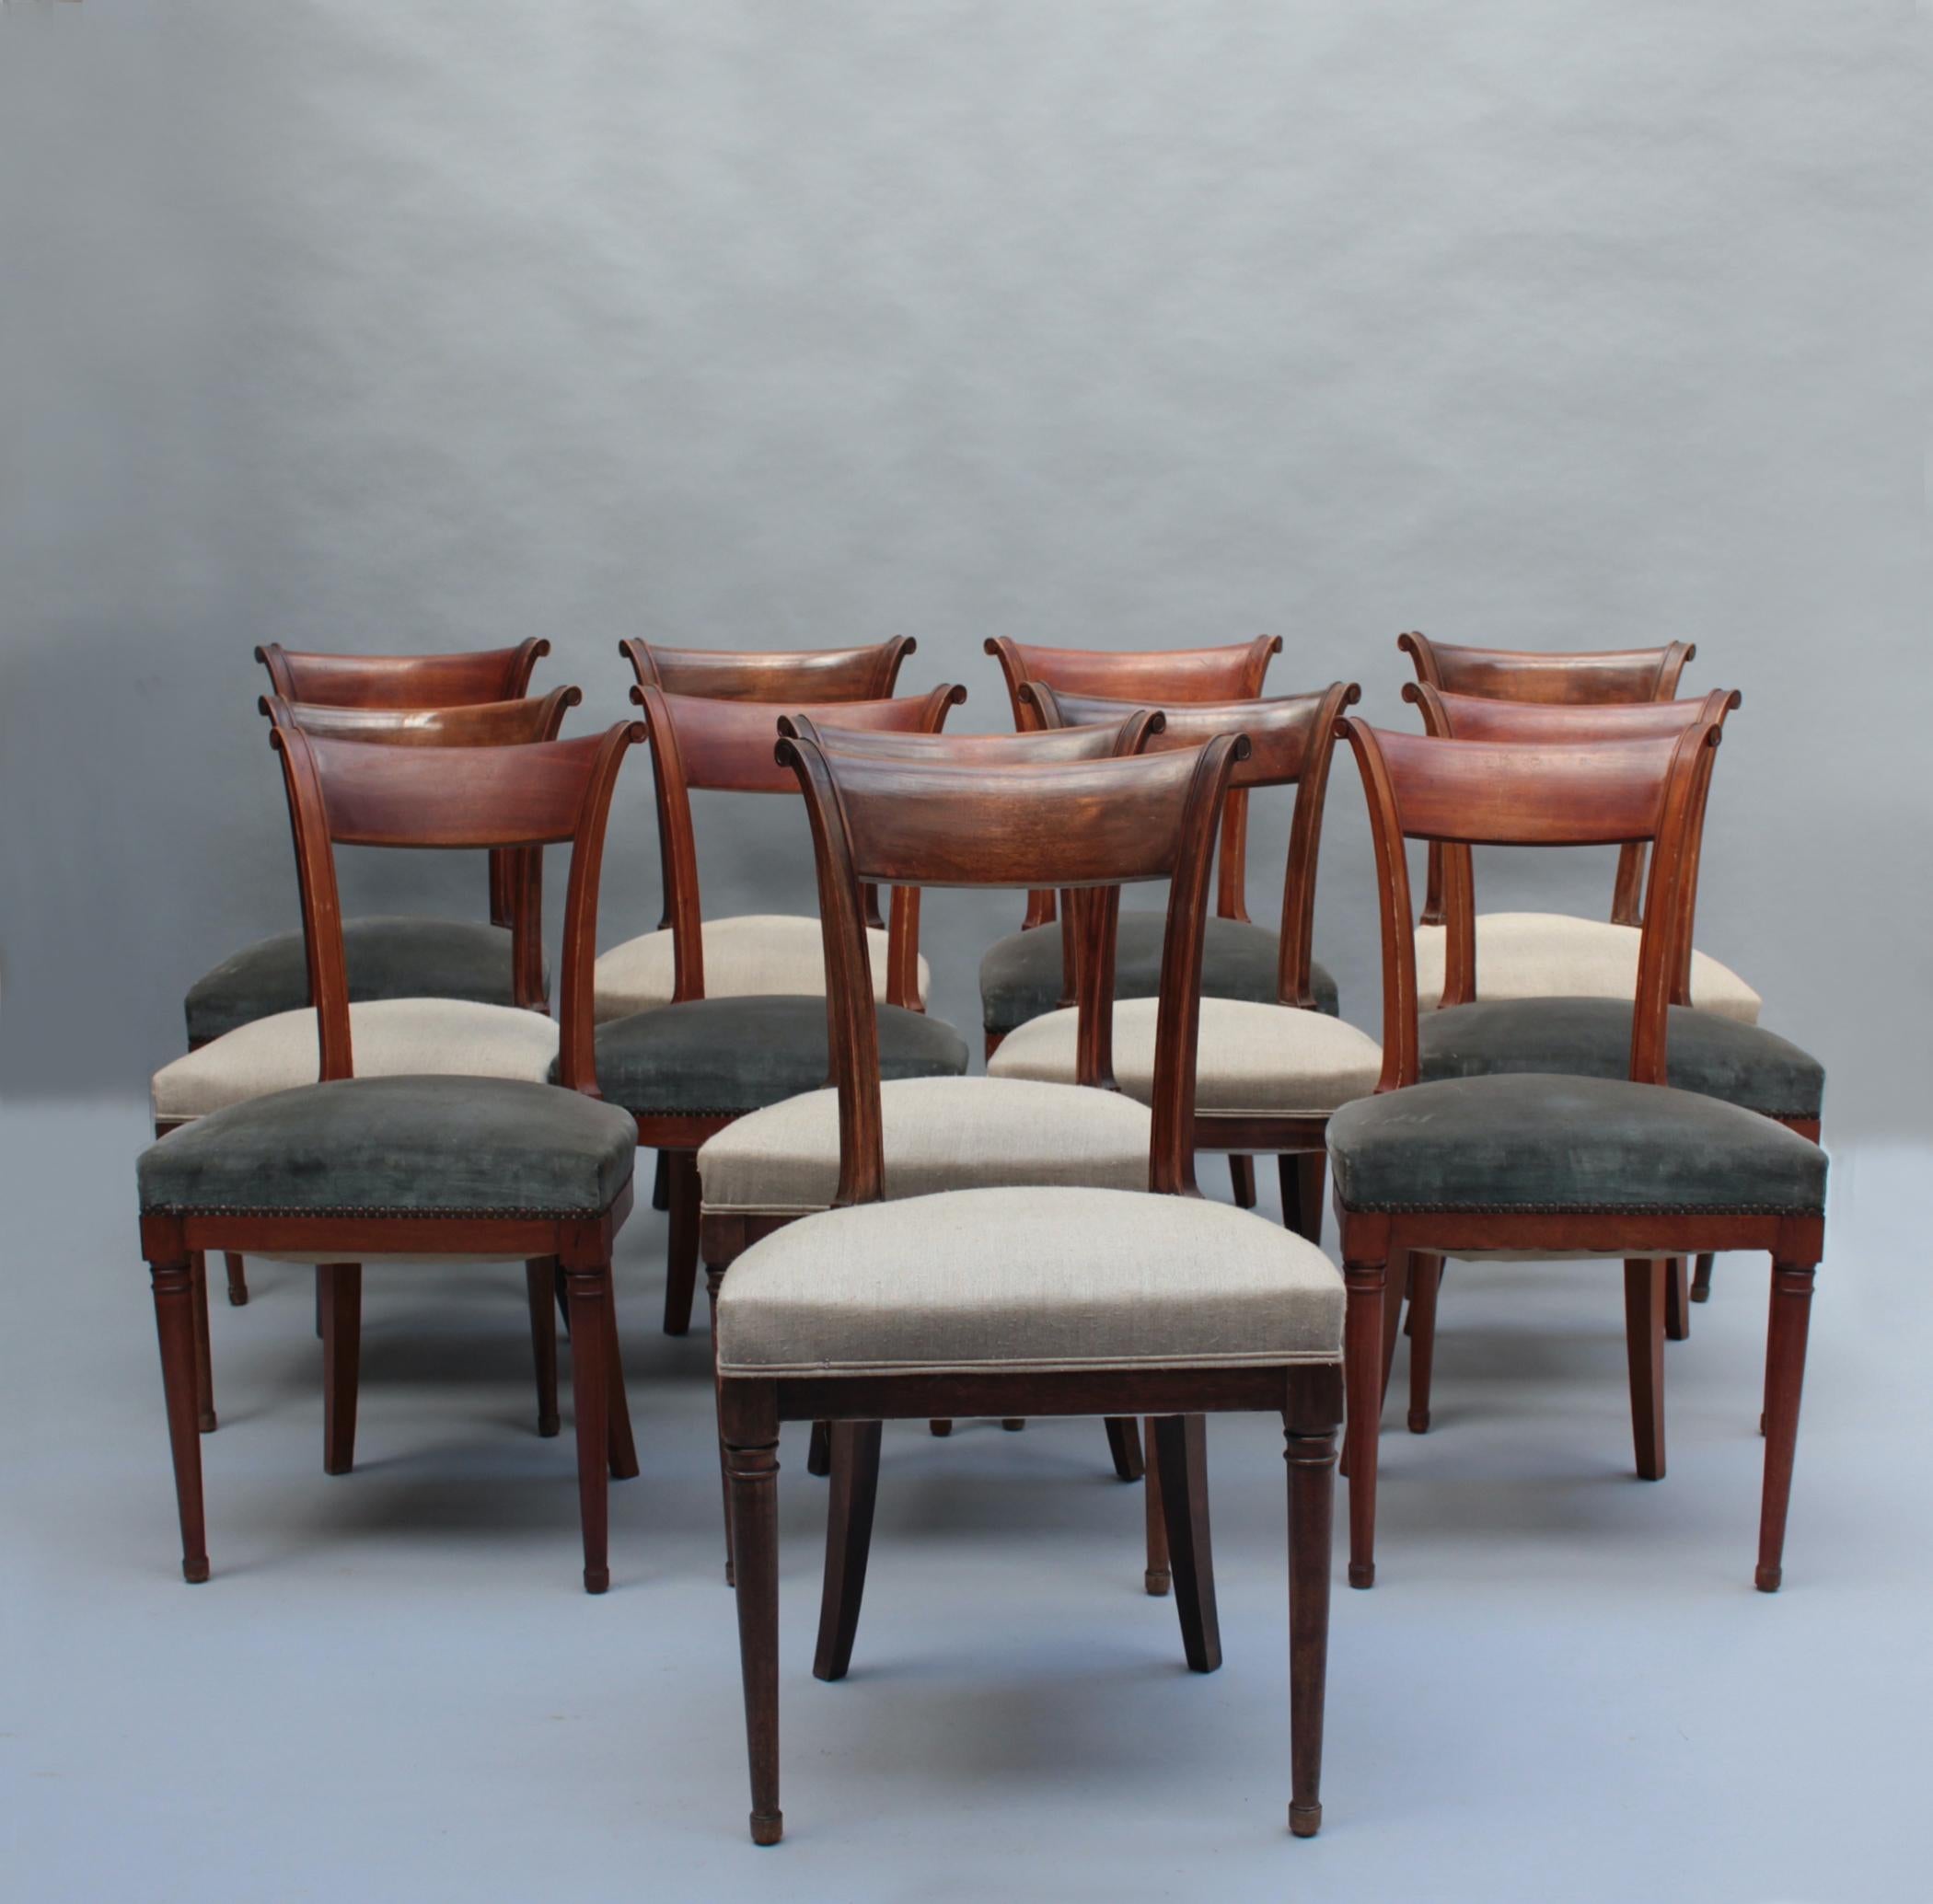 A set of twelve fine French Art Deco mahogany side chairs with a curved back, fluted back post, and turned wood details on front legs.